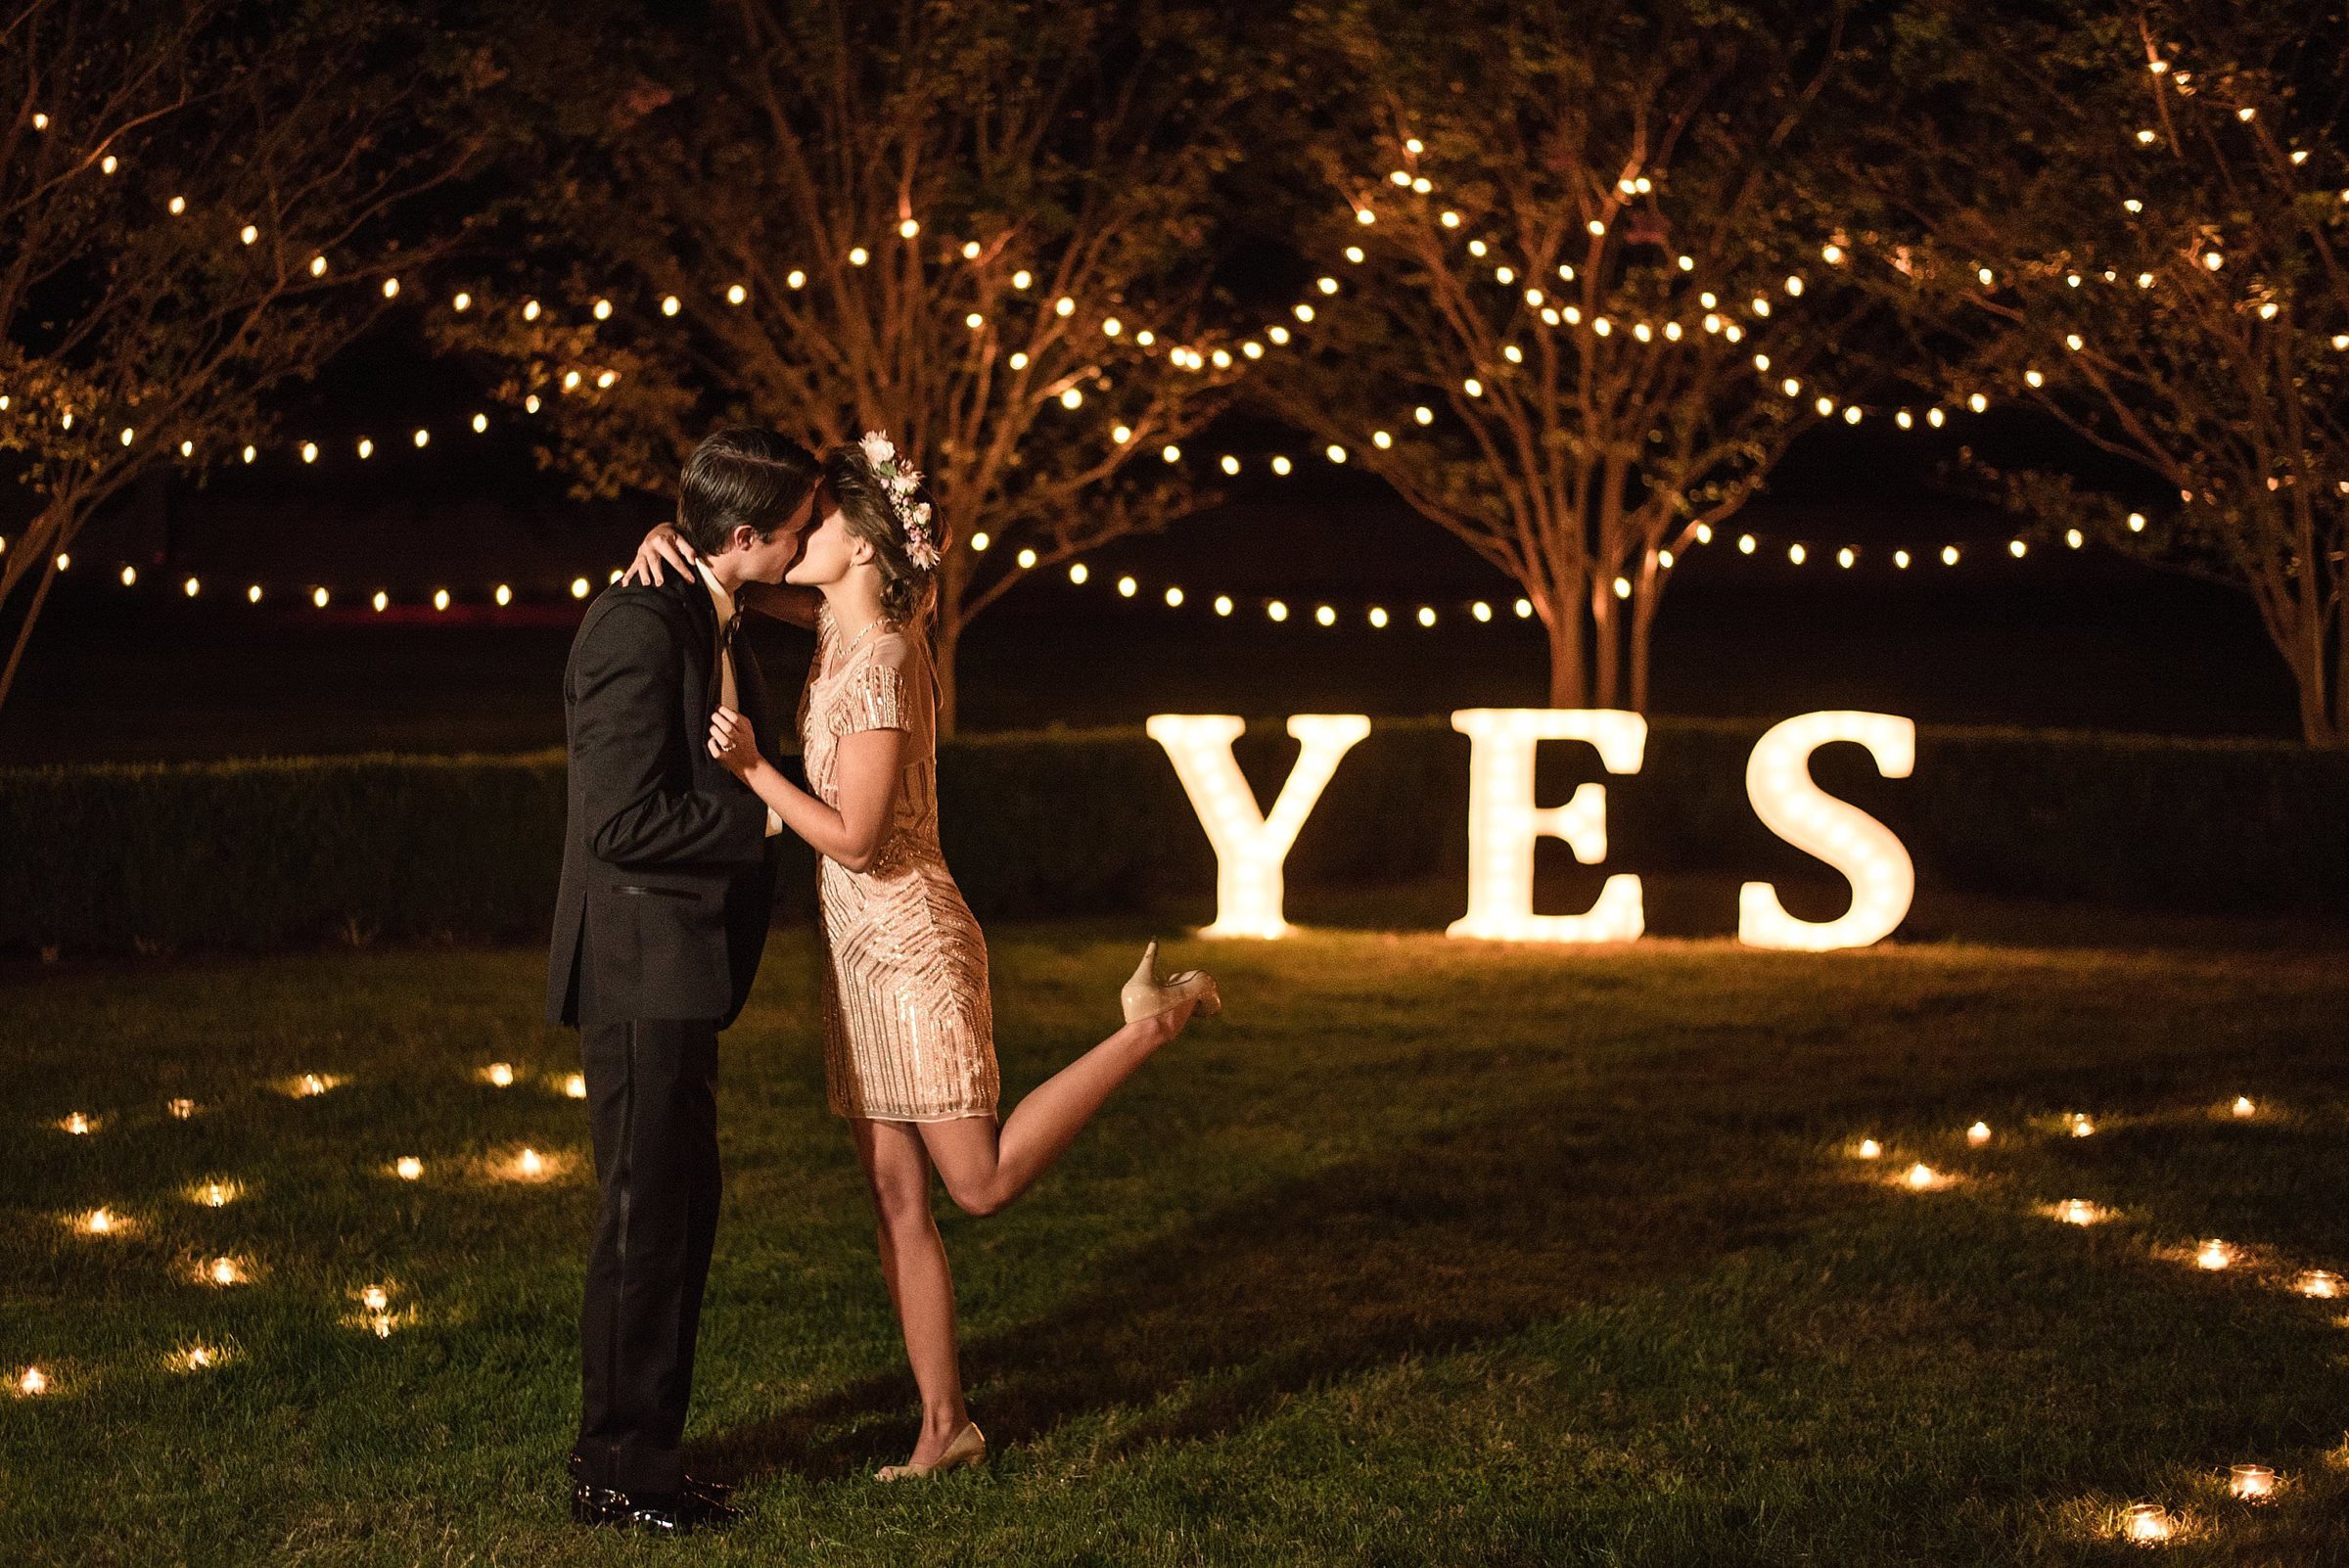 Proposal photo in the courtyard at Carnton with candlelit pathway and bistro light strung in the trees and oversized Yes letters lit in the background